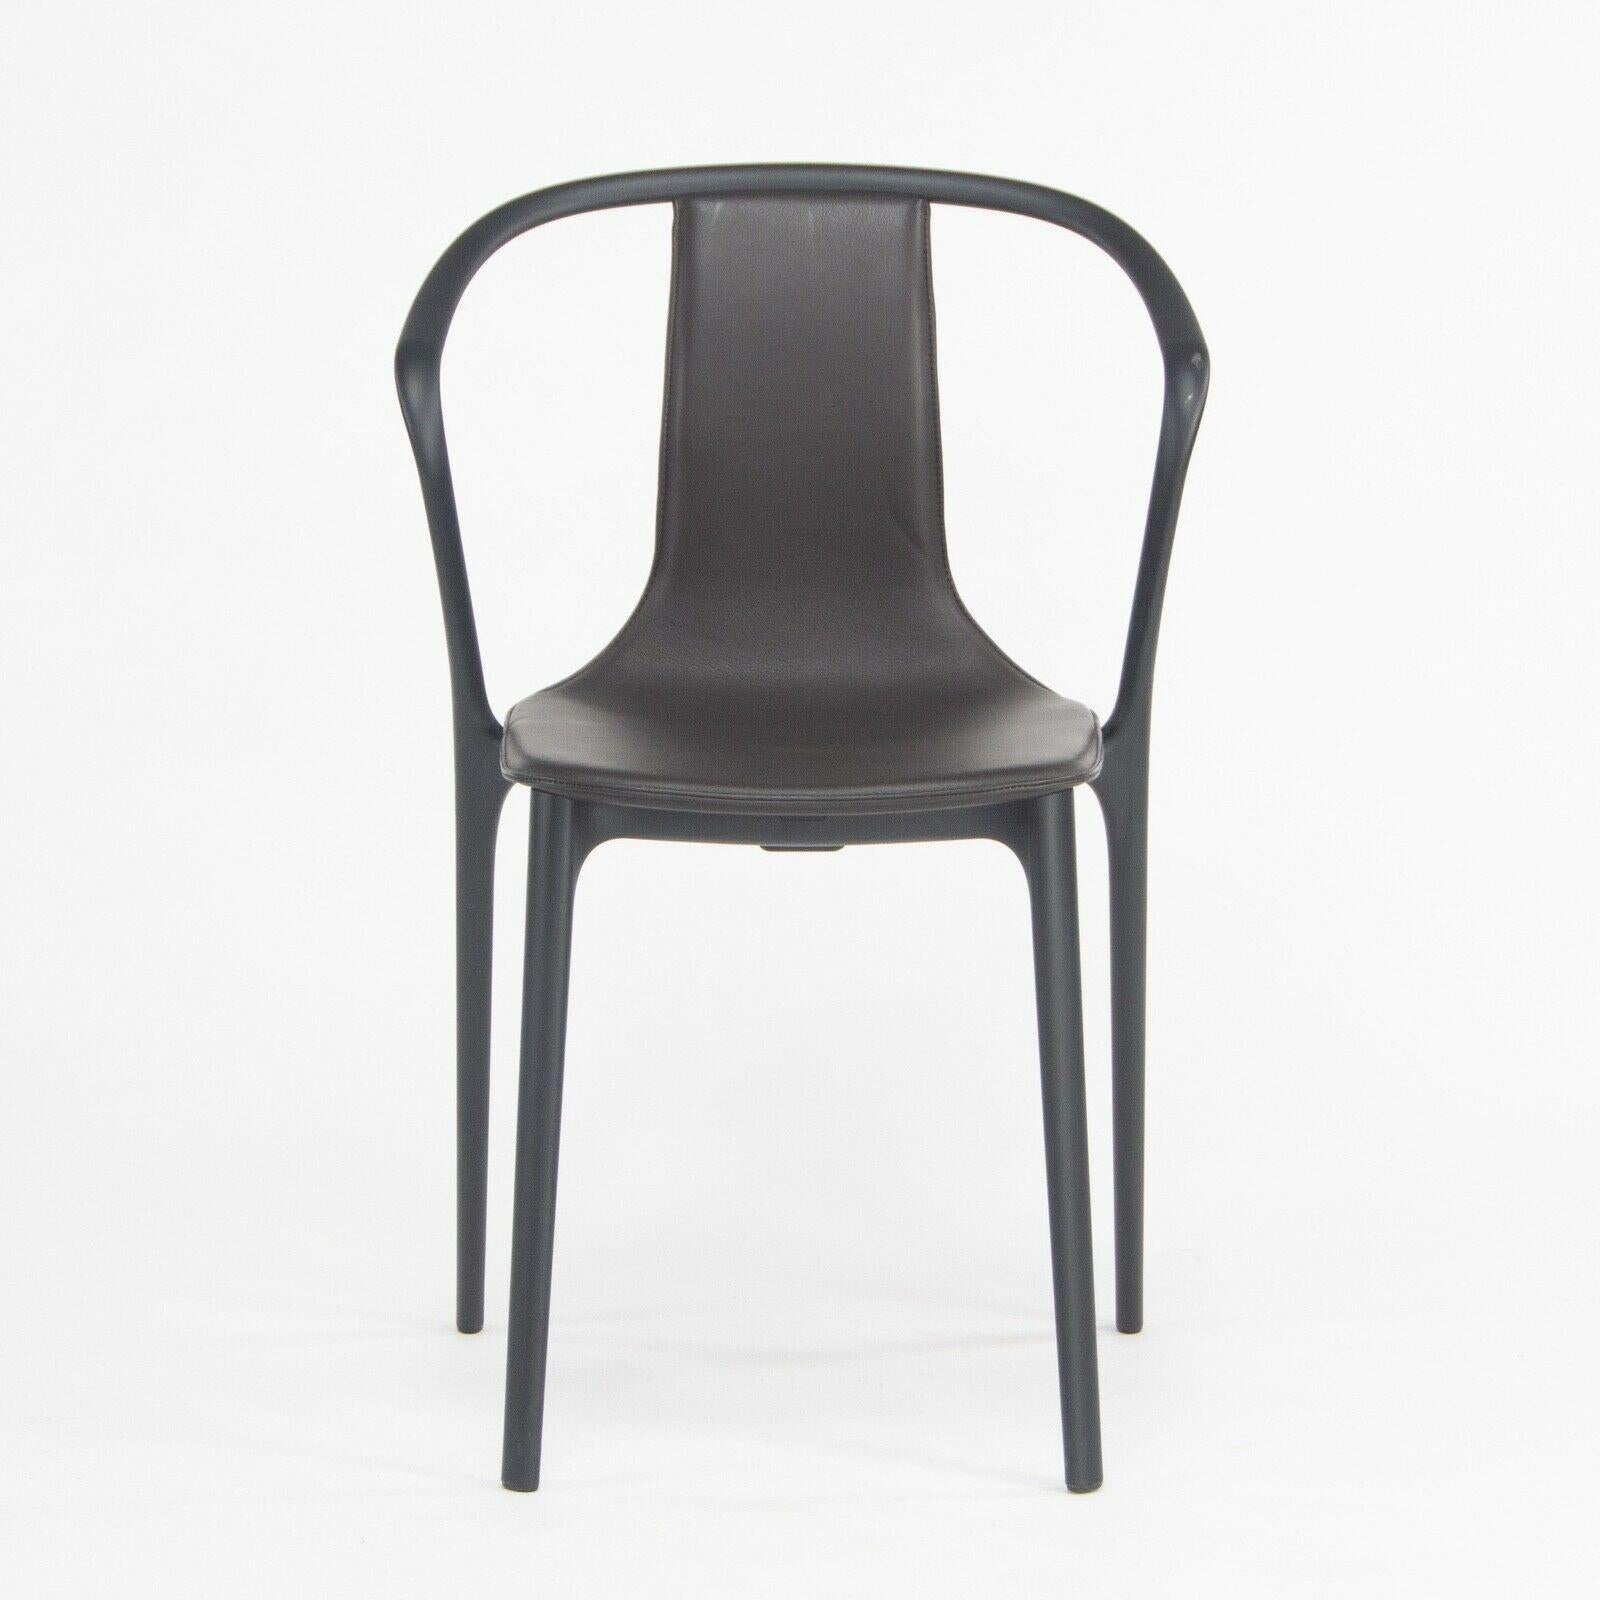 C. 2019 Vitra Belleville Armchair in Brown Leather by Ronan & Erwan Bouroullec For Sale